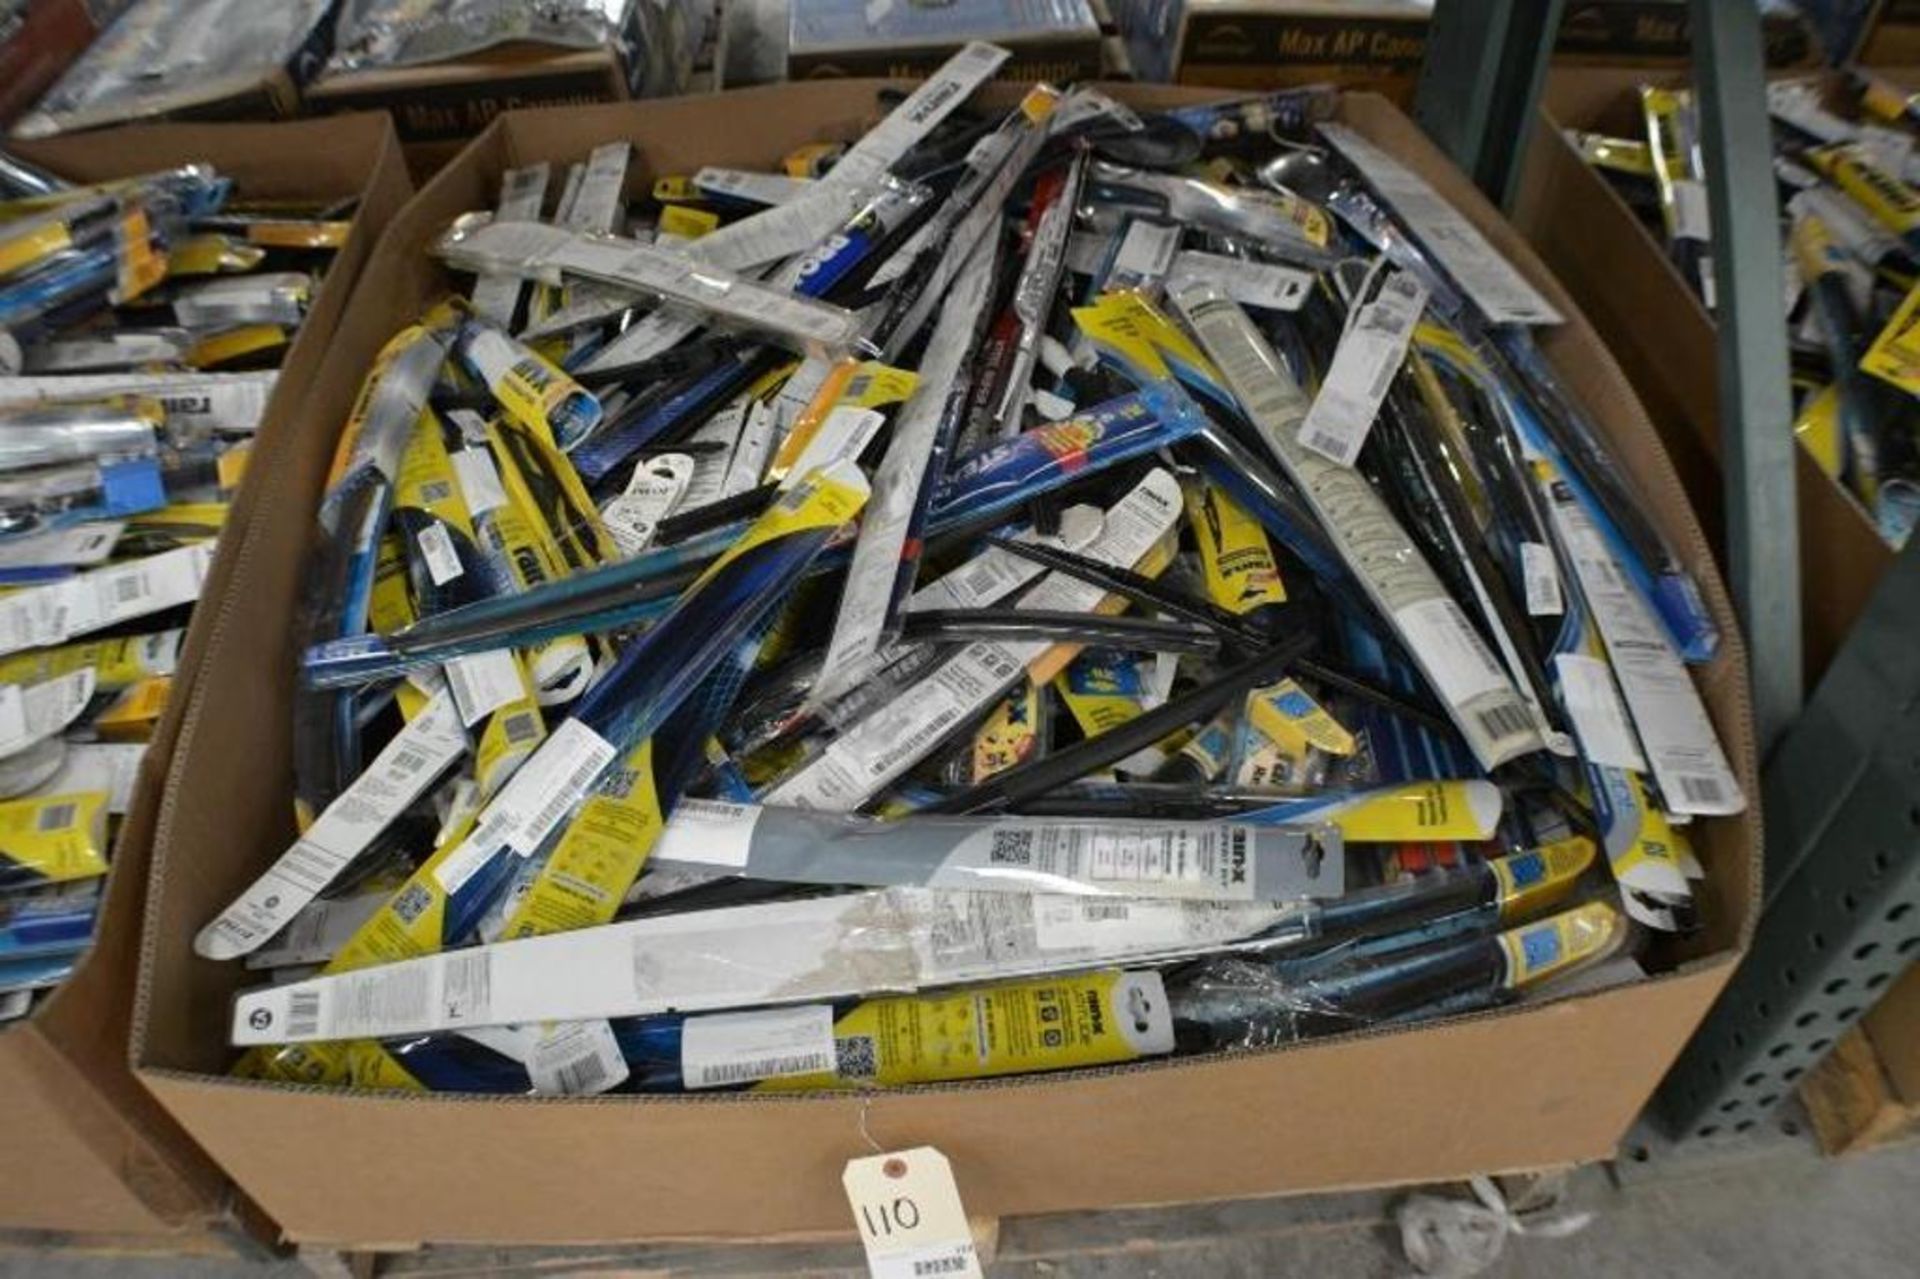 Wiper Blades. Assorted Brands and Sizes. Contents of Pallet